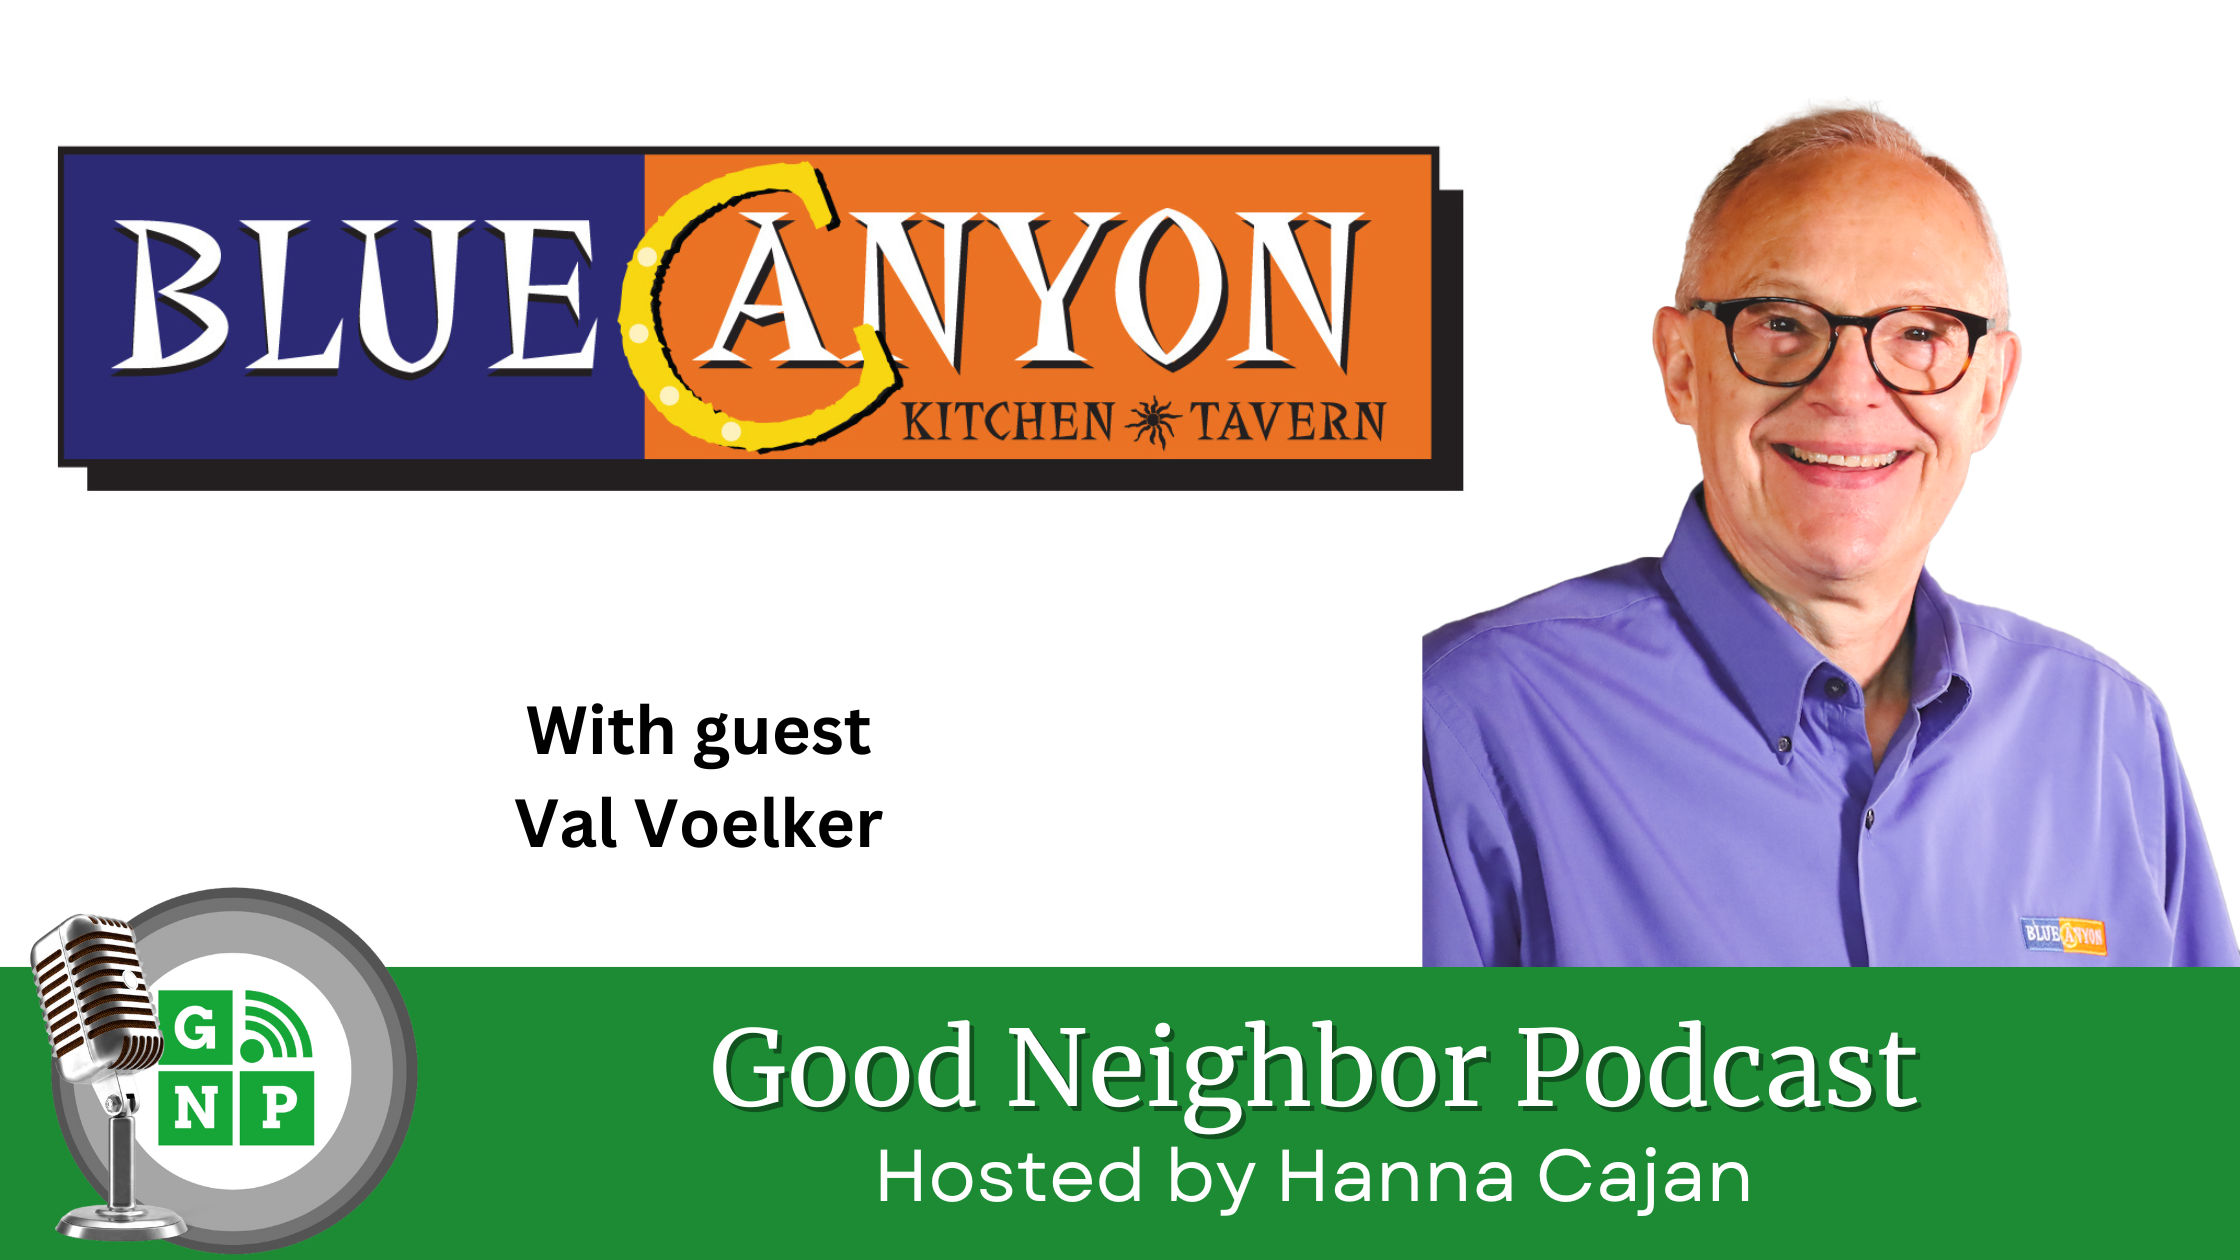 Episode #8 Blue Canyon Kitchen & Tavern with Val Voelker